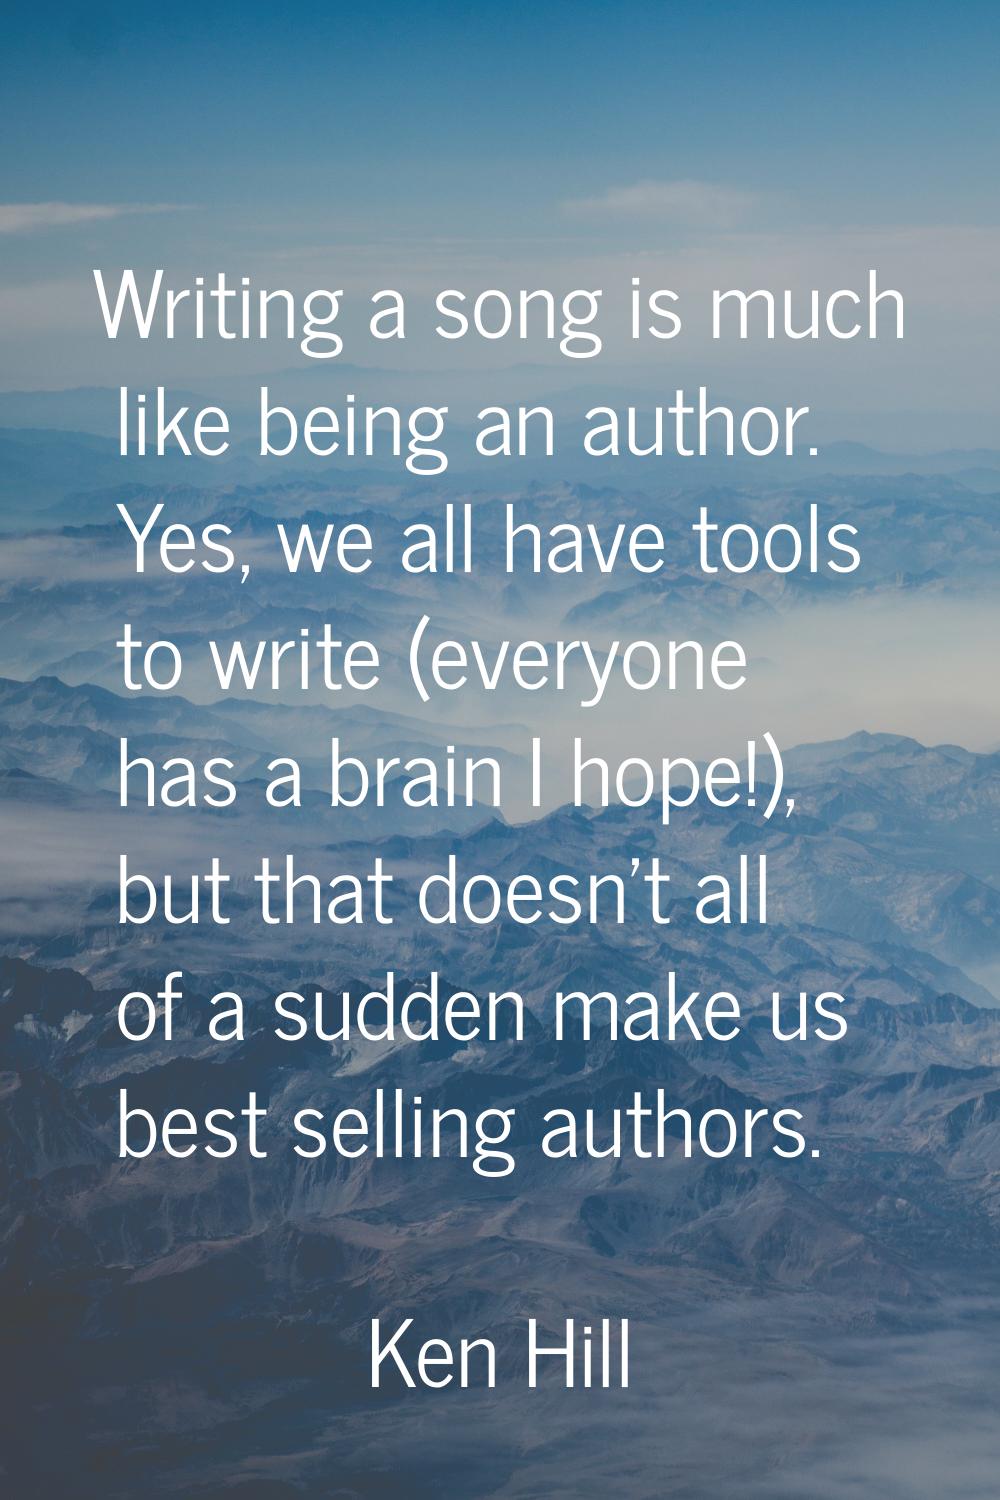 Writing a song is much like being an author. Yes, we all have tools to write (everyone has a brain 